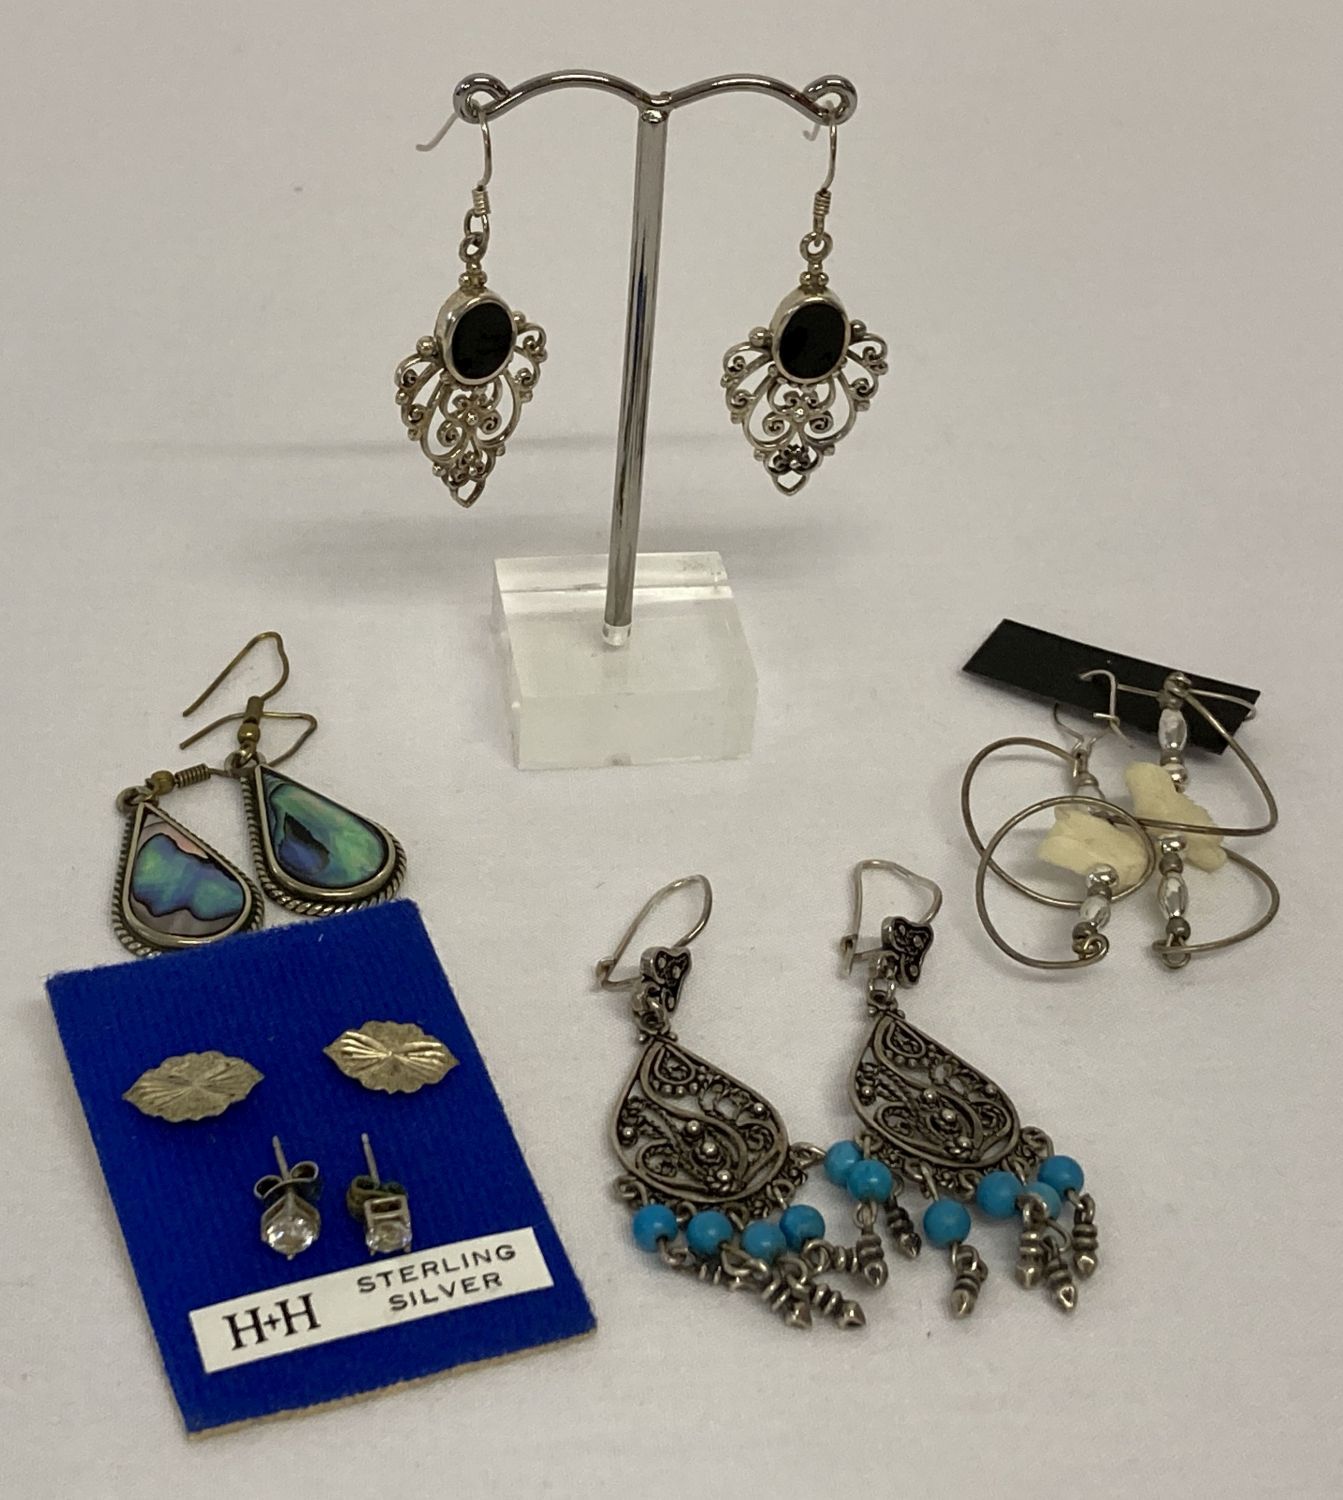 6 pairs of vintage and modern design silver and white metal earrings in both drop and stud styles.